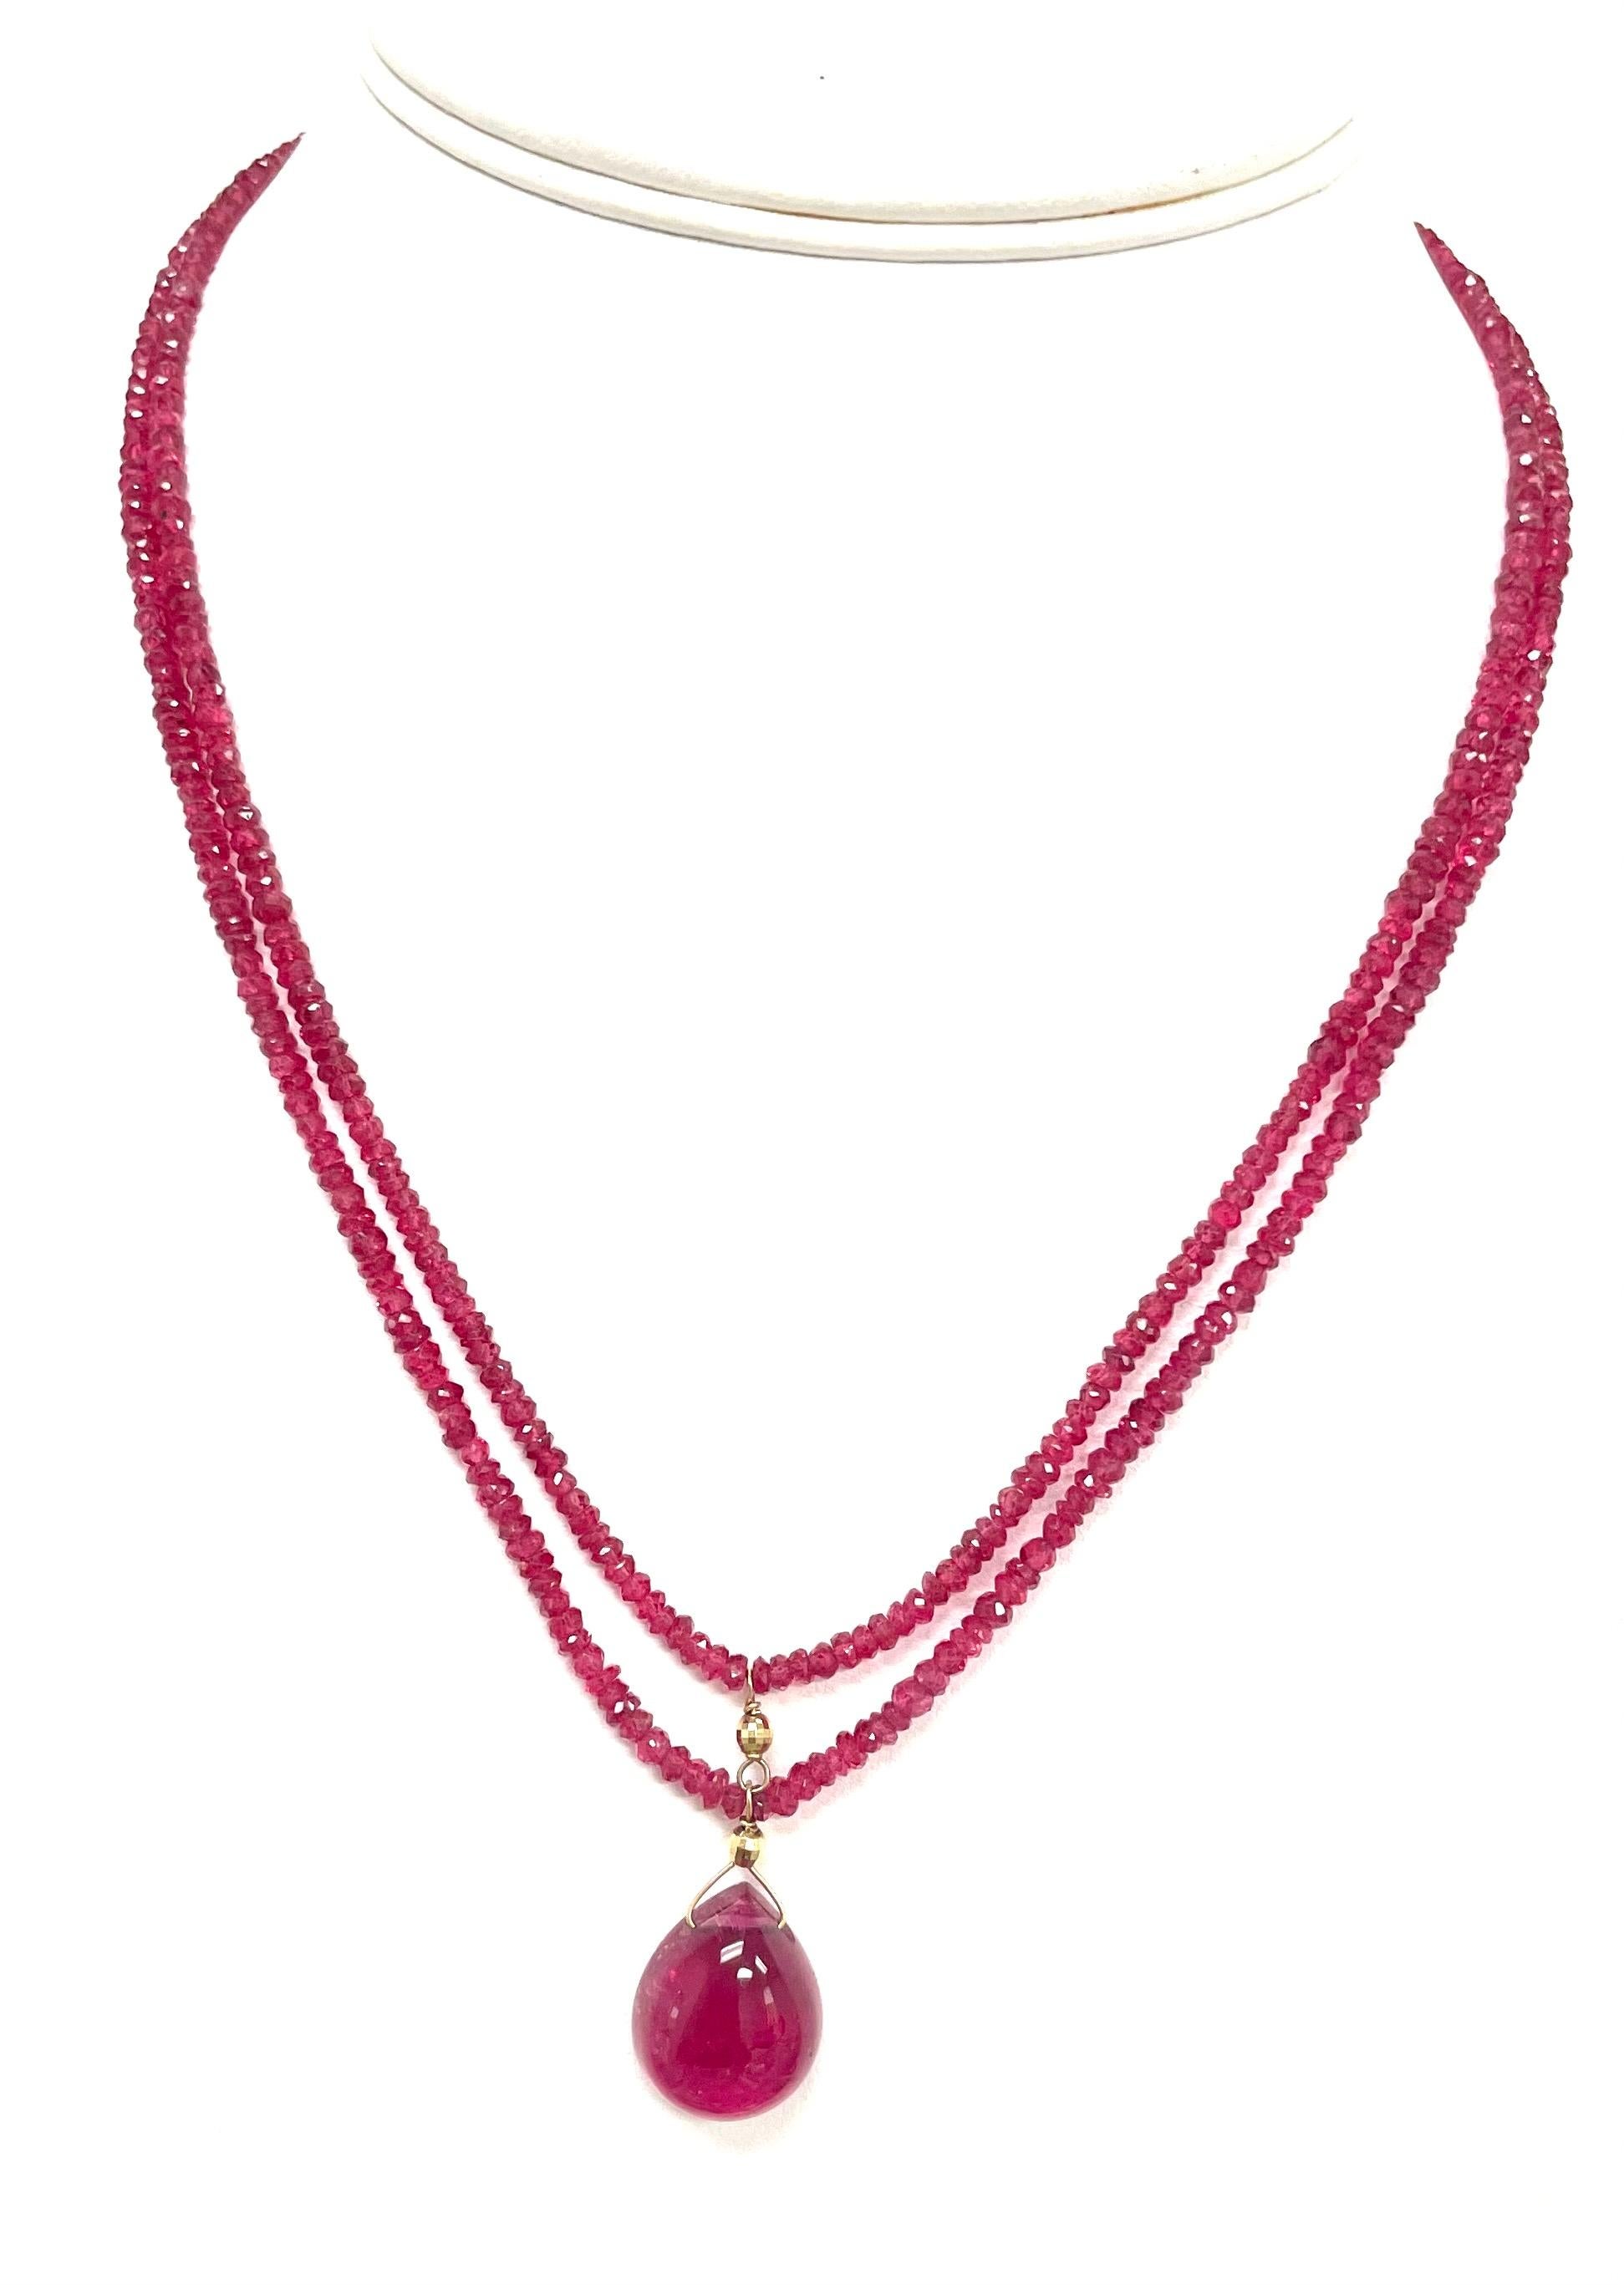 Hot Pink Spinel with Red Rubellite Tourmaline Pendant Double Strand Necklace In New Condition For Sale In Laguna Beach, CA